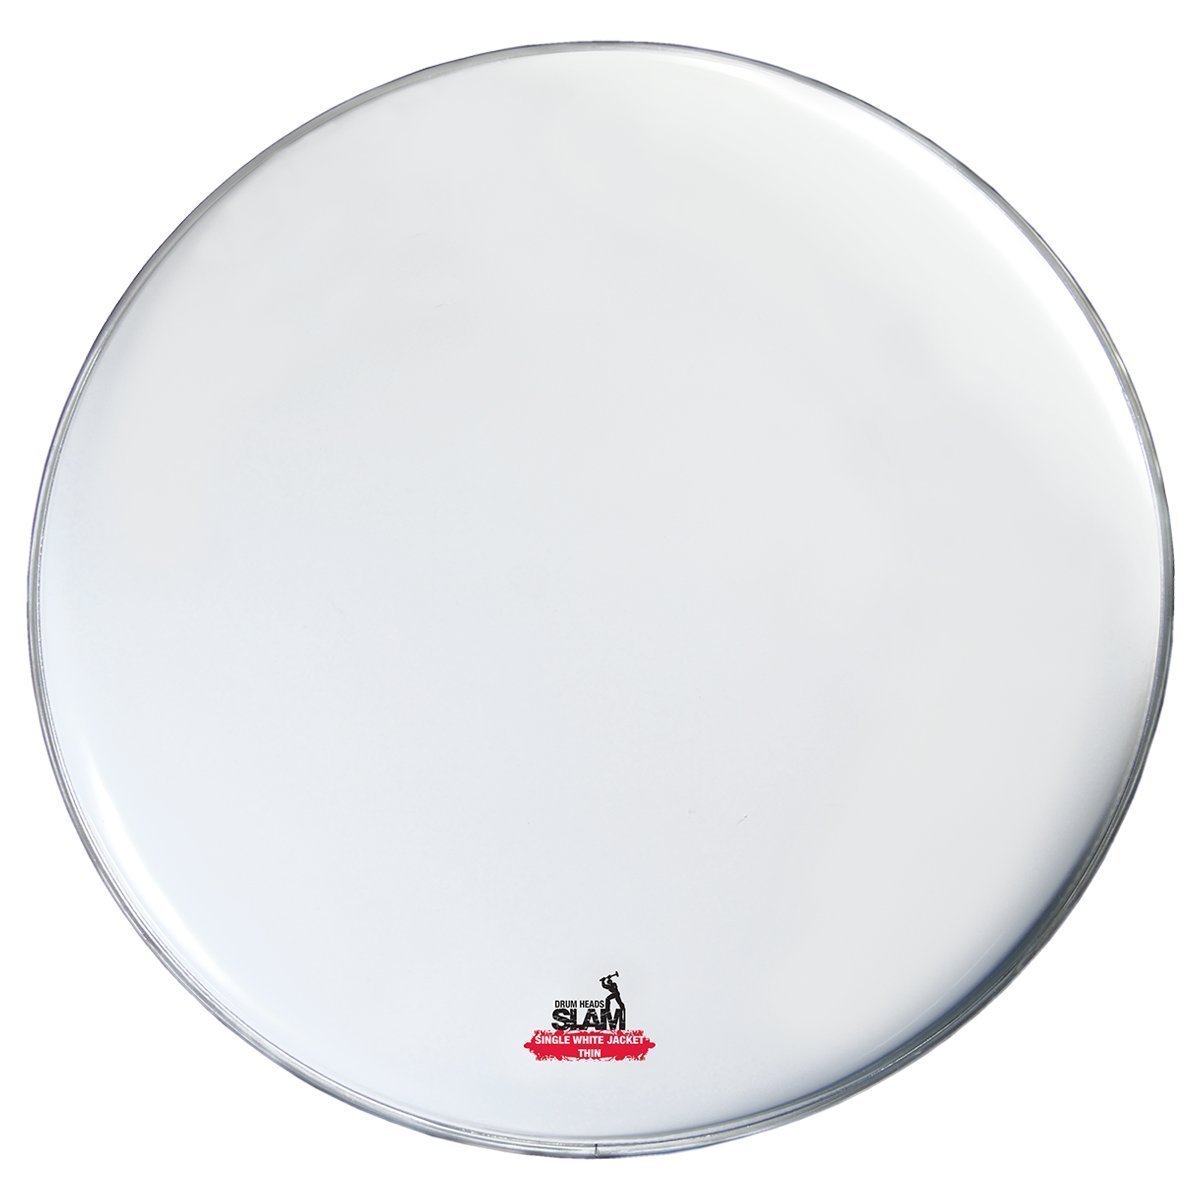 Slam Single Ply Smooth Coated Thin Weight Drum Head (12")-SDH-1PCT-T12